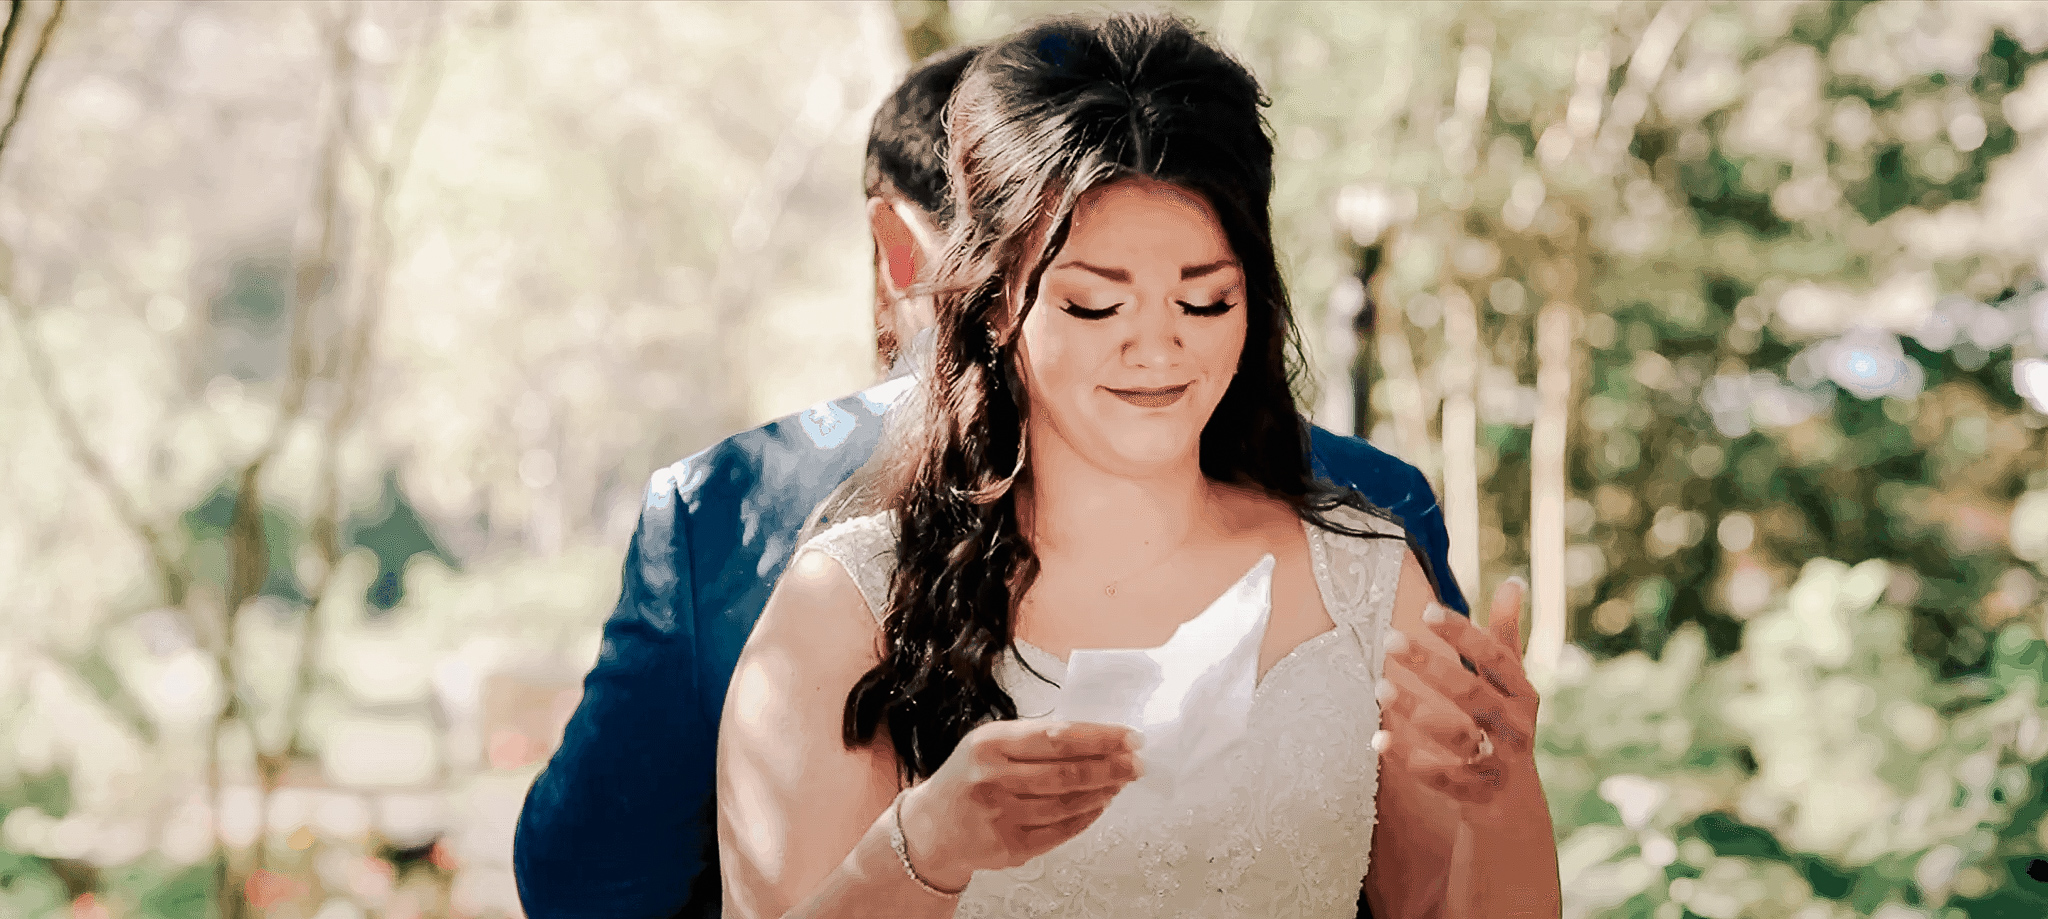 Emotional bride privately reading vows to her groom during a first touch moment